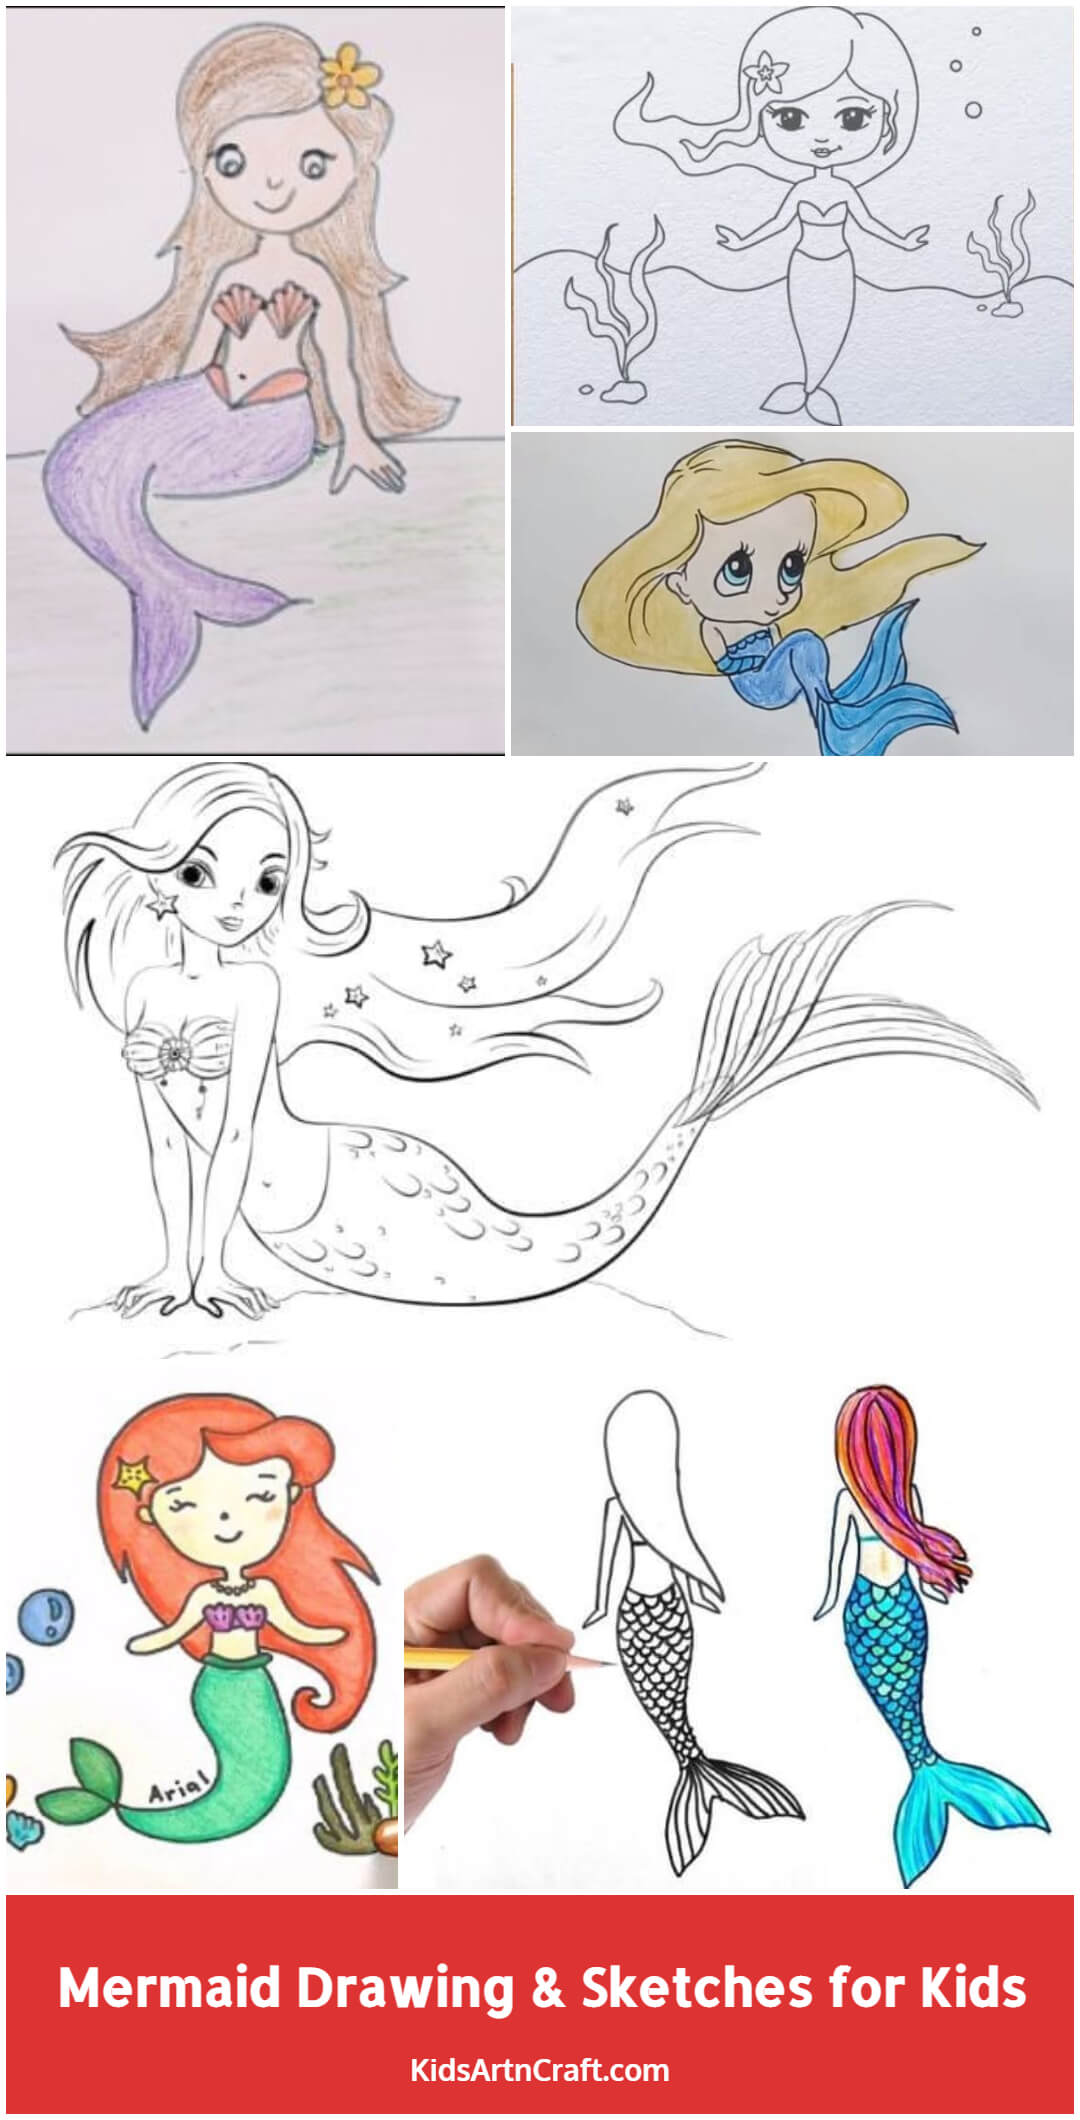 HOW TO DRAW A MERMAID SCENERY DRAWING | OIL PASTEL DRAWING OF MERMAID | JALPARI  DRAWING EASY | Easy drawings, Art drawings for kids, Mermaid drawings